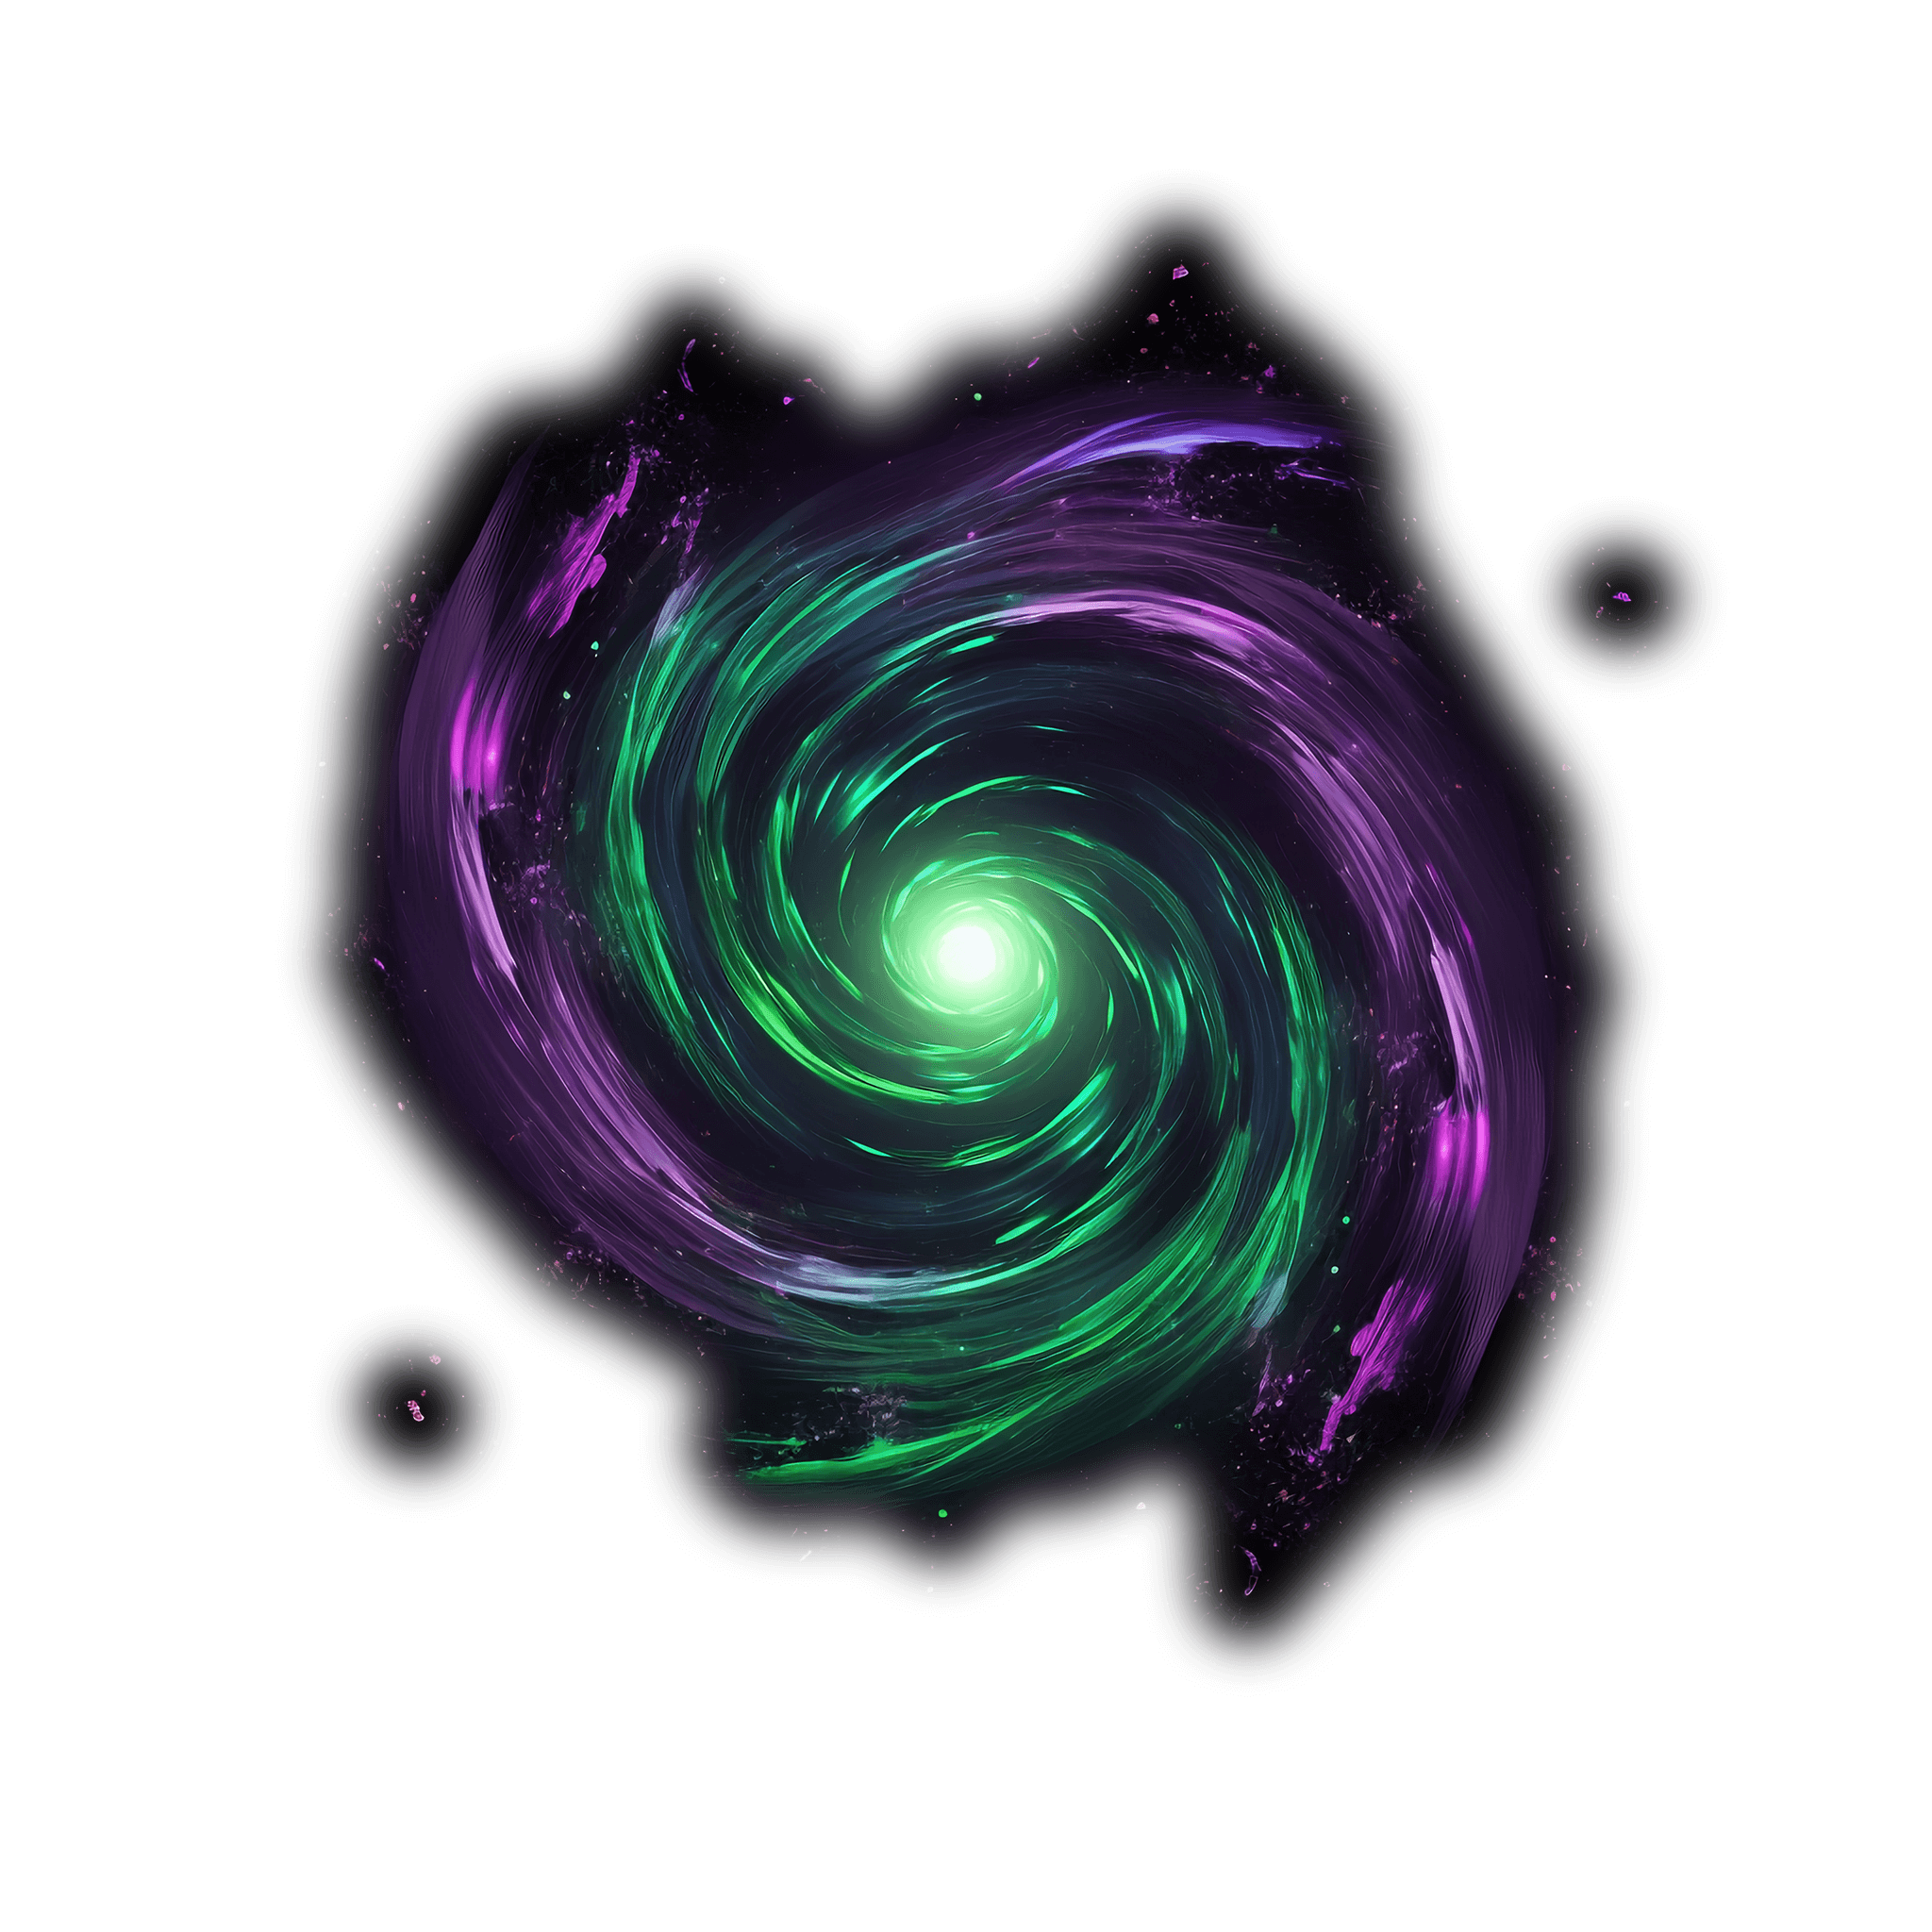 An impossibly beautiful purple and green spiral galaxy slowly rotating counter clockwise, part of Nerd Alert's Signature design.